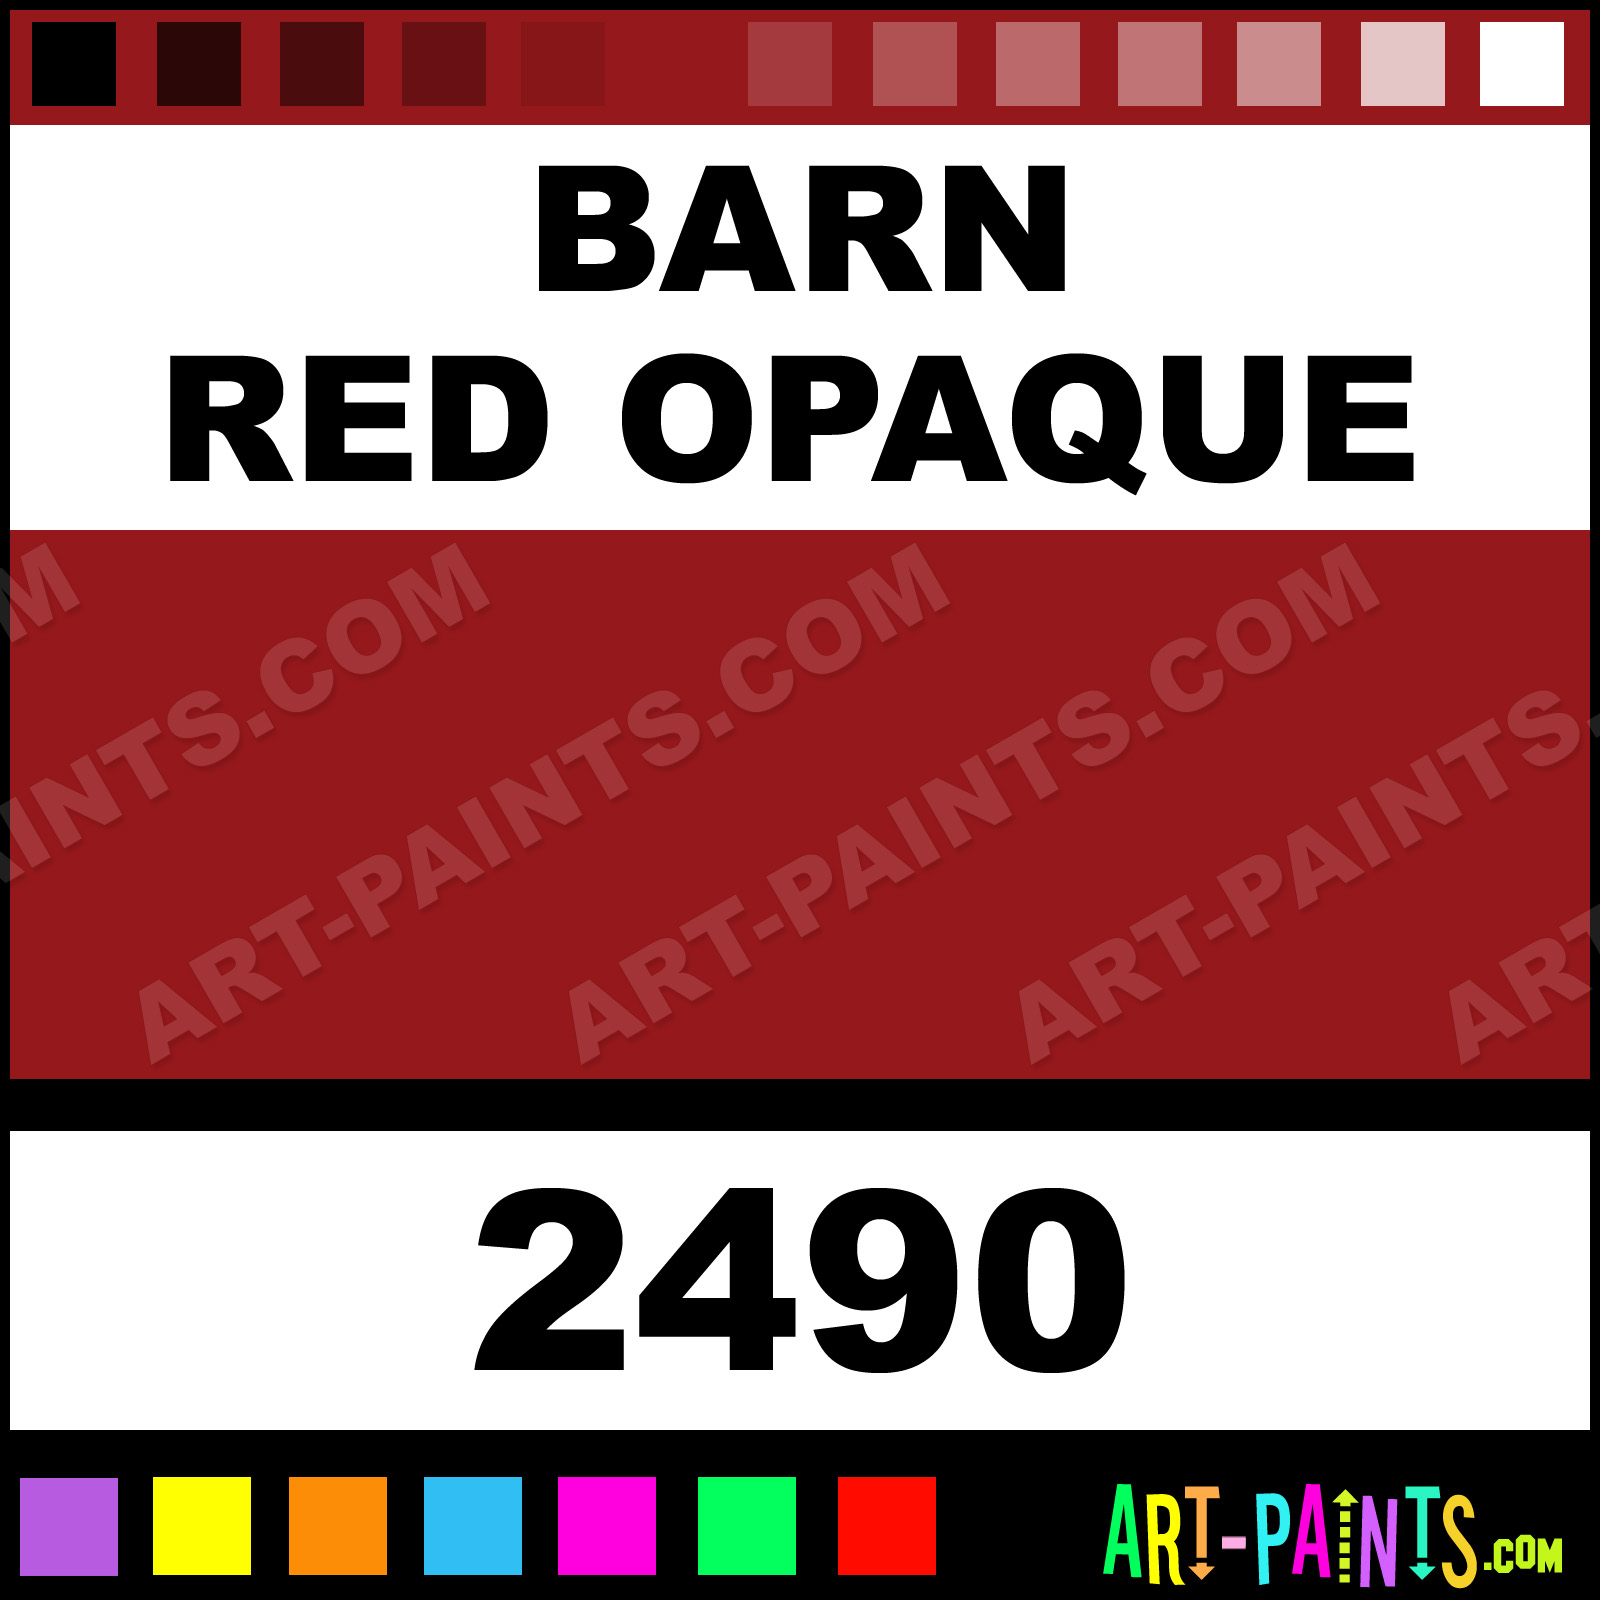 http://www.art-paints.com/Paints/Acrylic/Delta/Barn-Red-Opaque/Barn-Red-Opaque-xlg.jpg